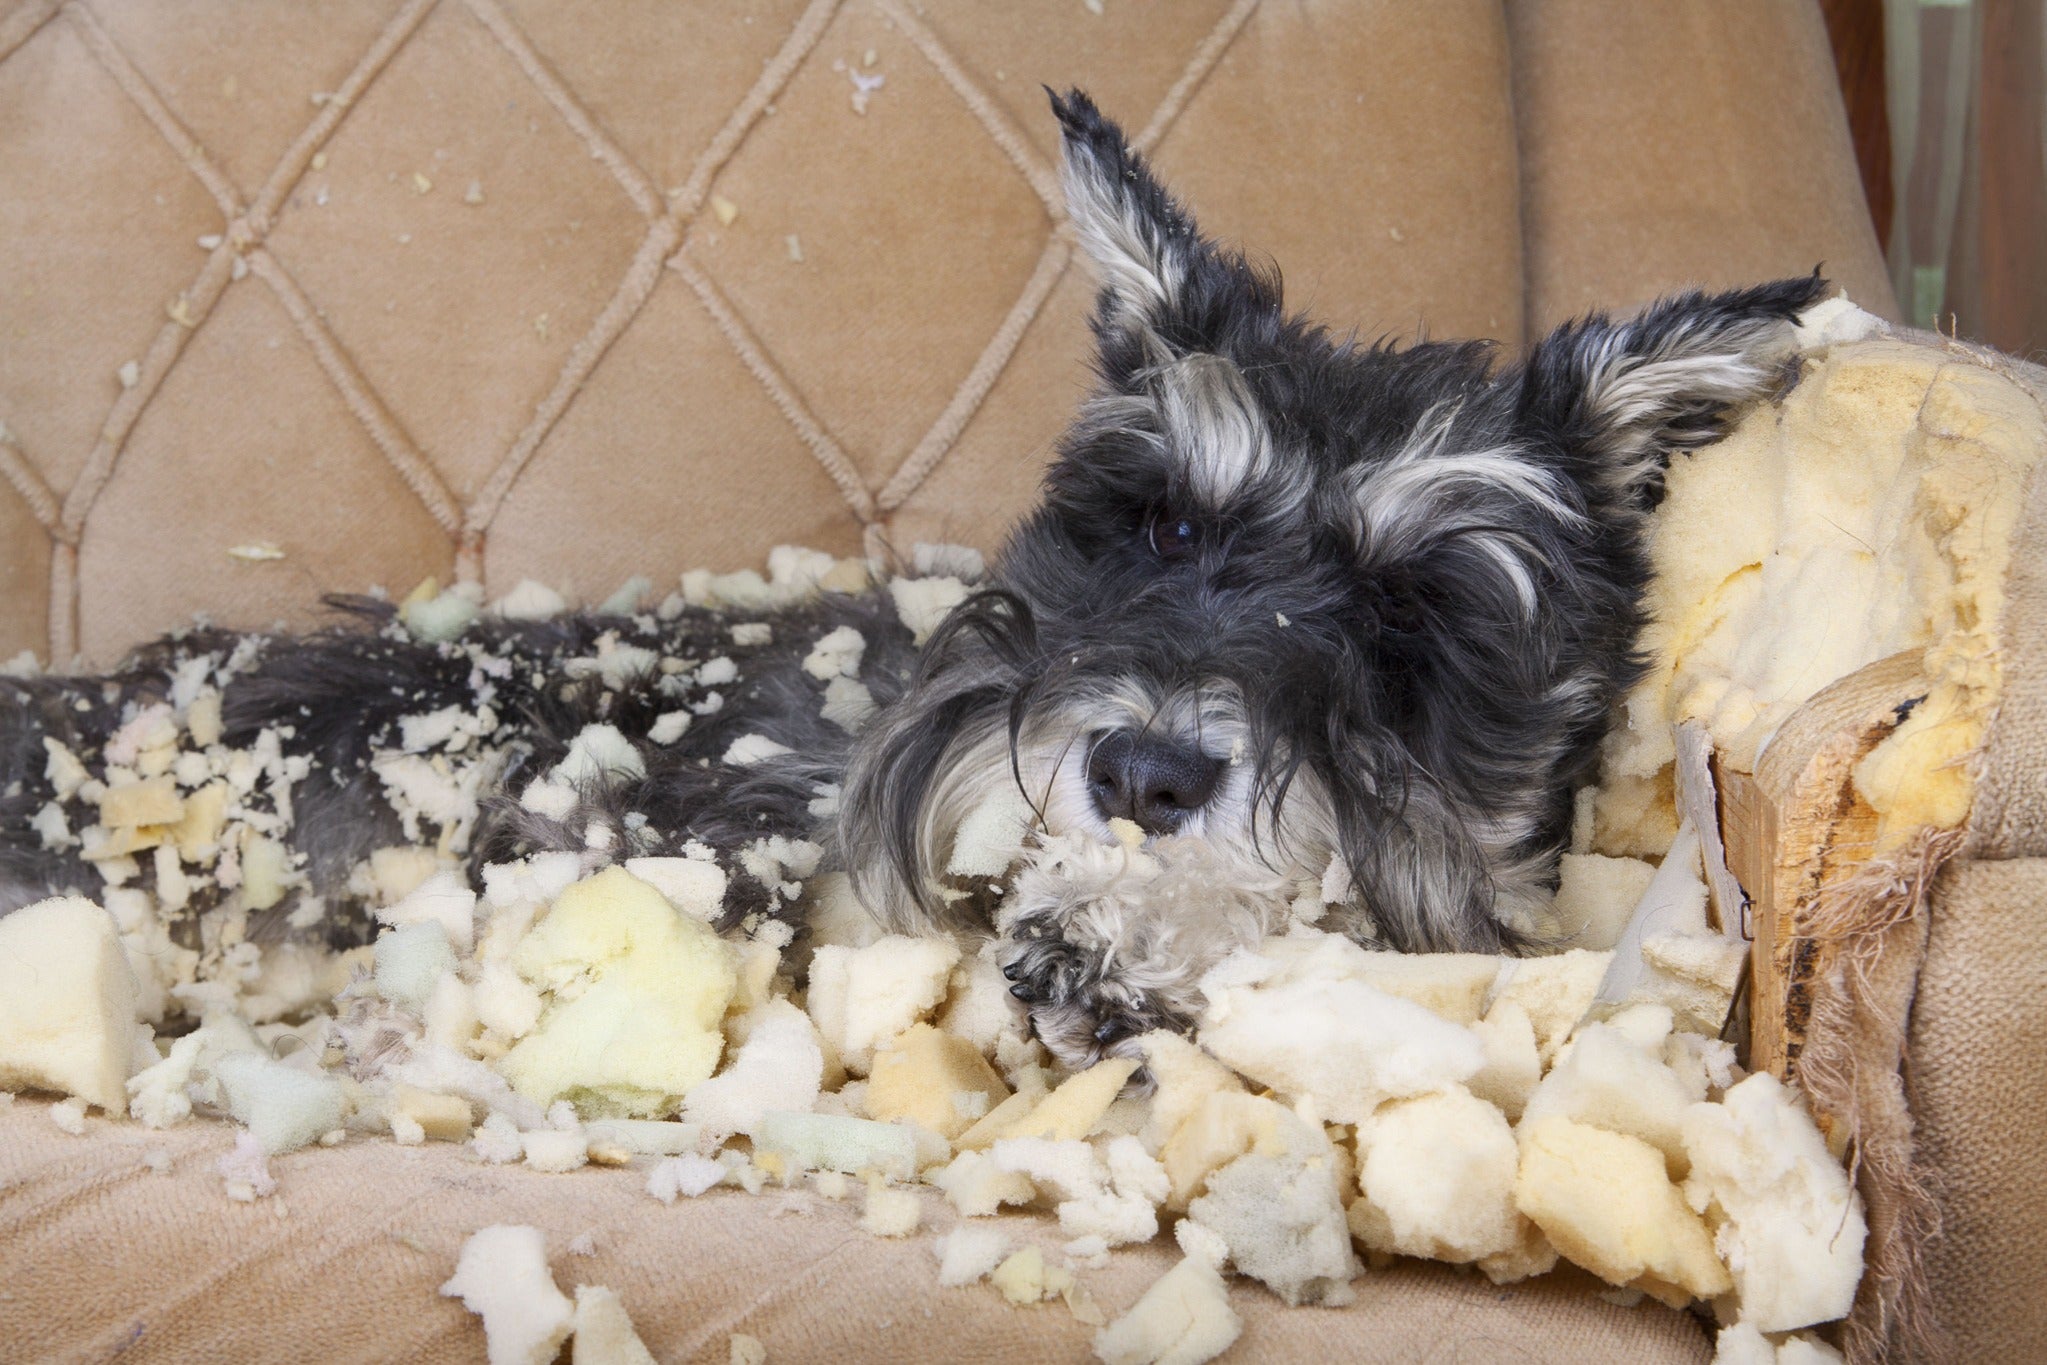 Tips to prevent bad chewing habits form your puppy